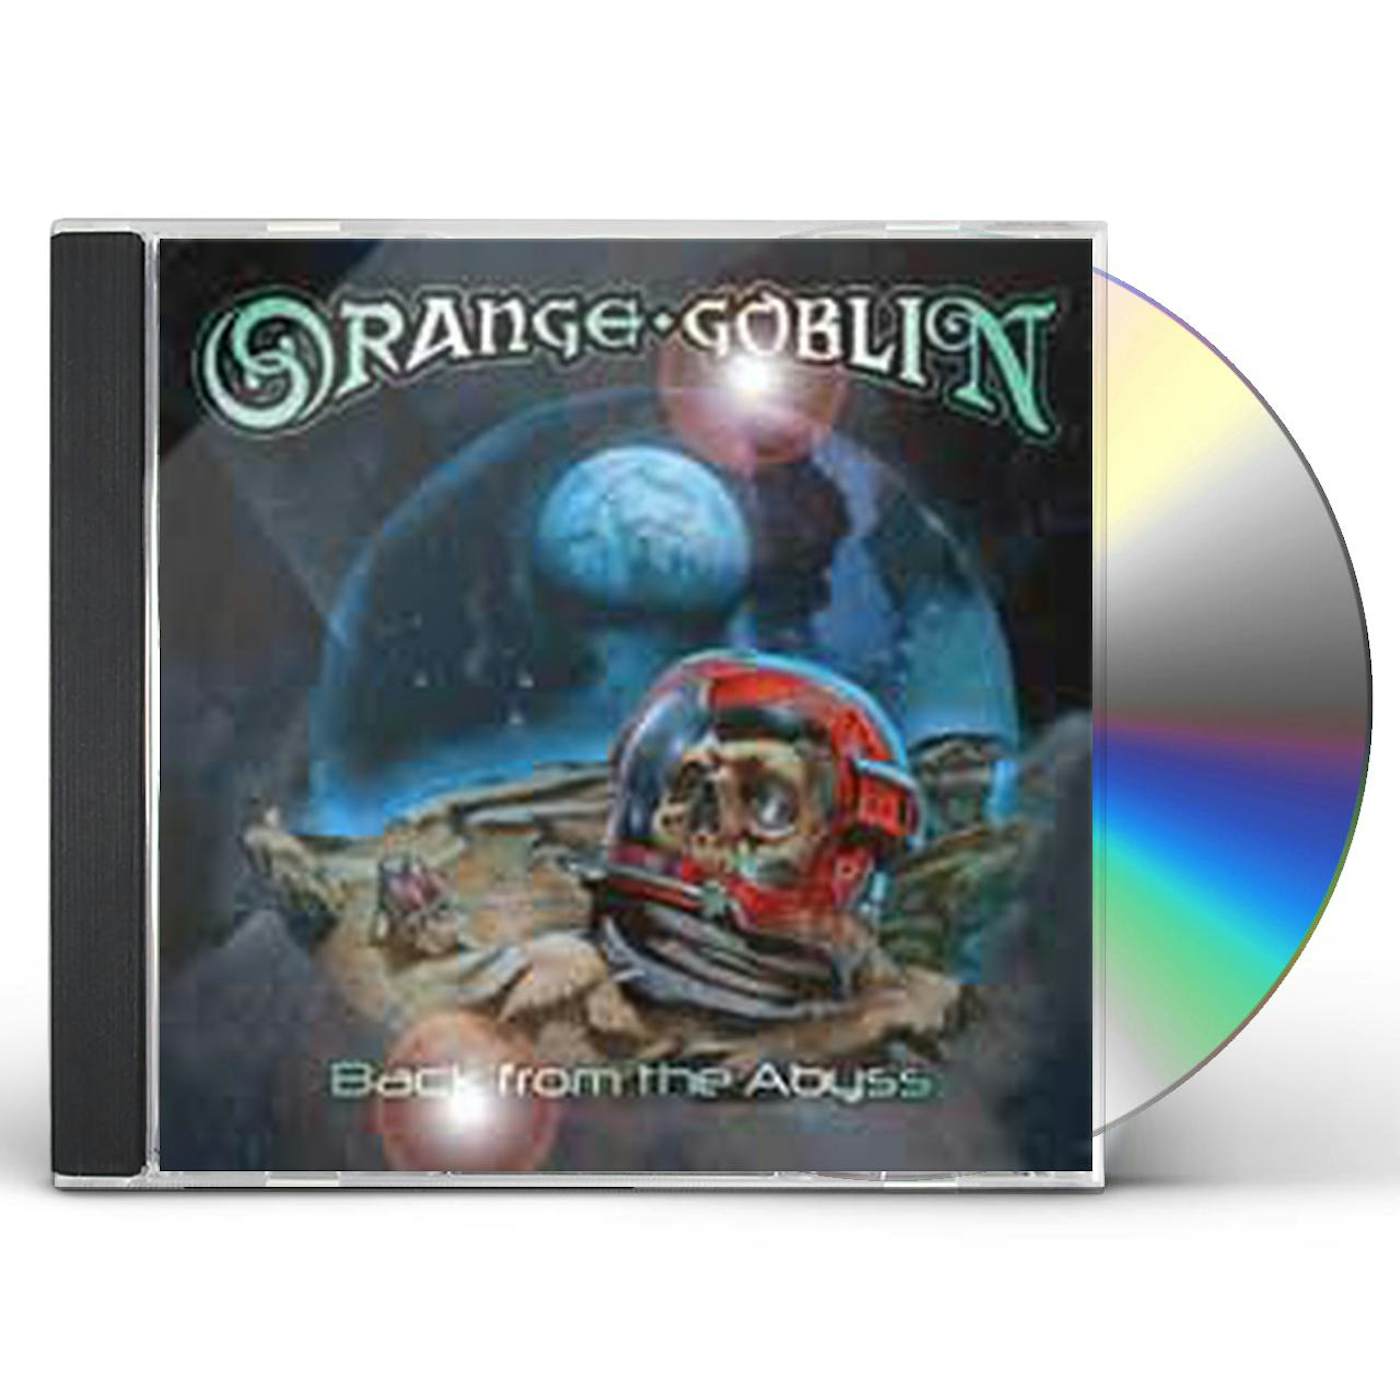 Orange Goblin BACK FROM THE ABYSS CD